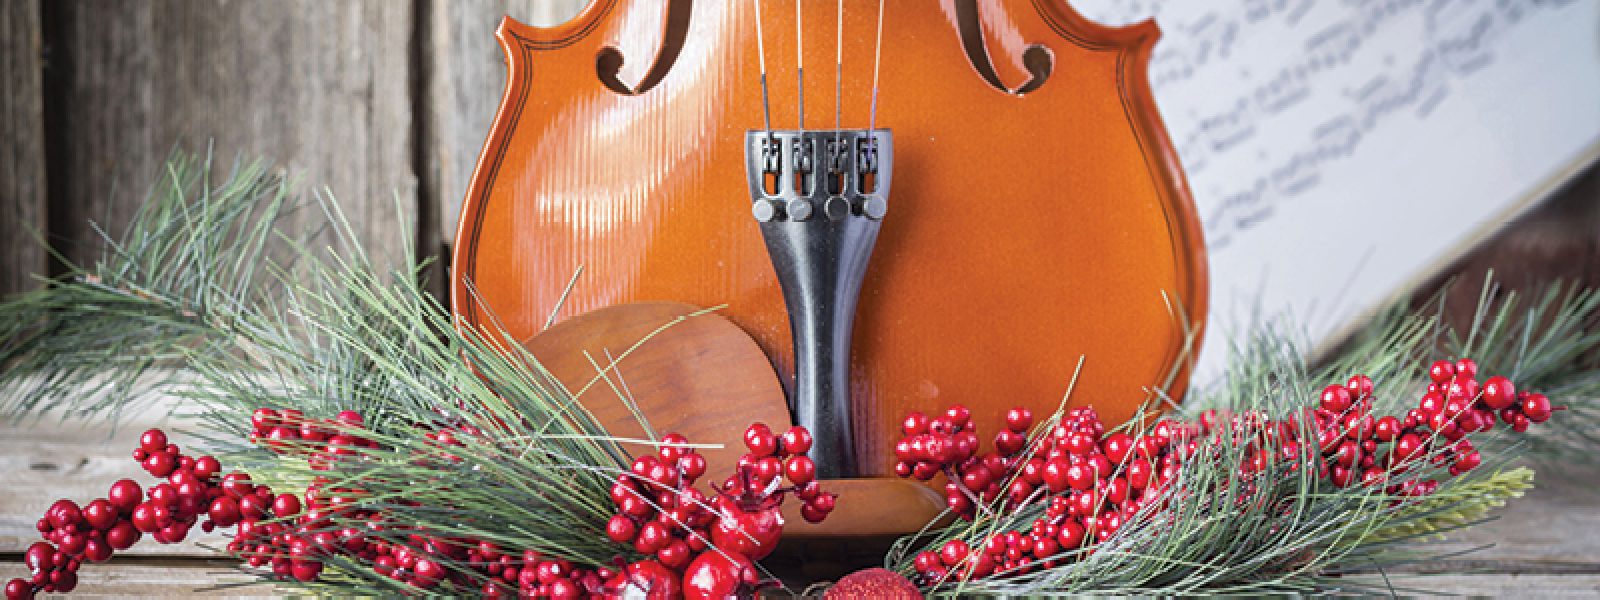 Violin in front of sheet music with pine, red berries, and red ornaments